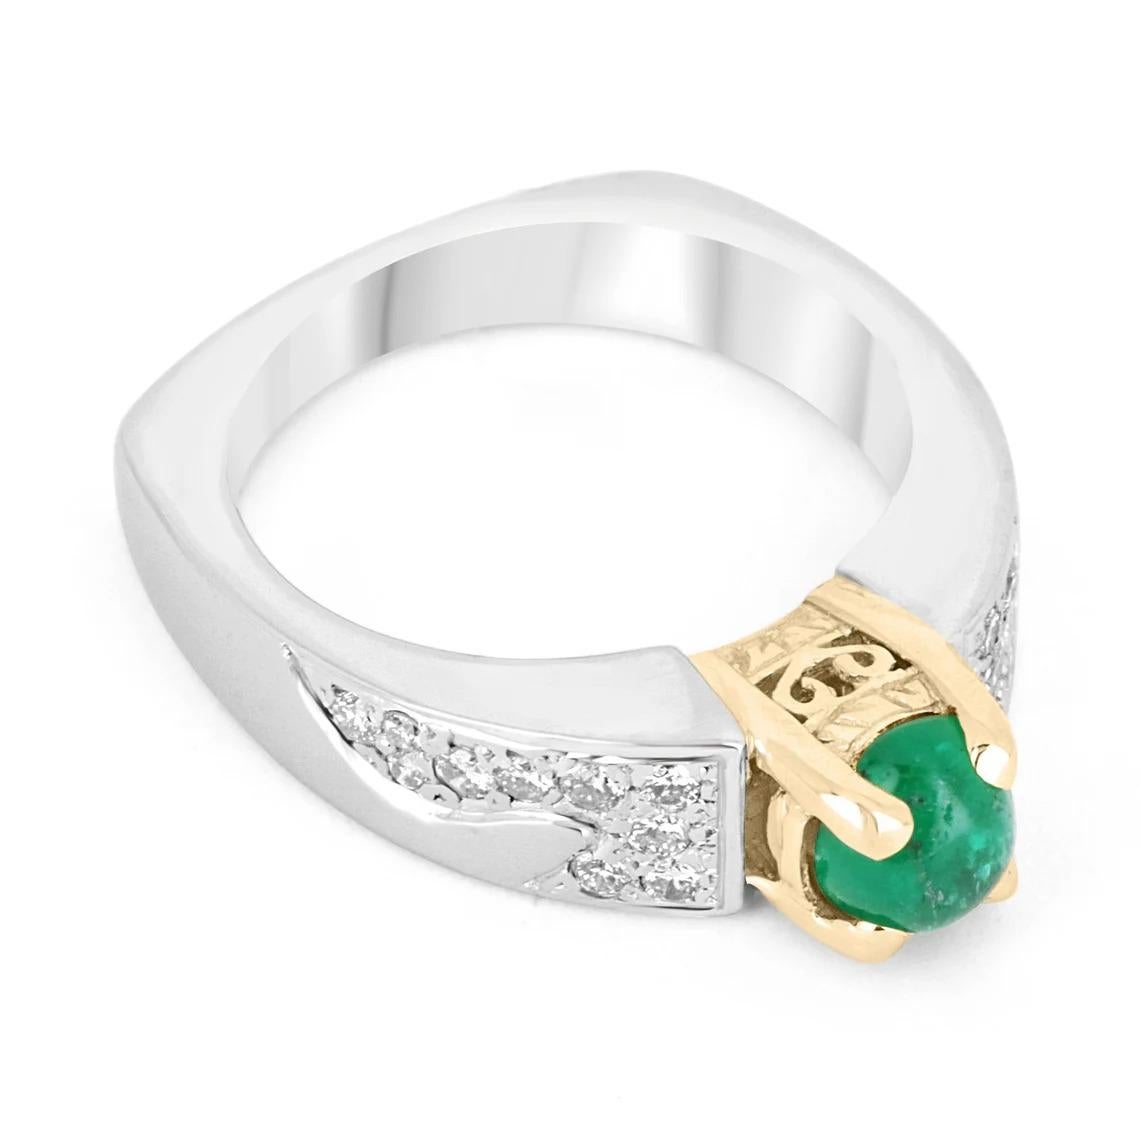 Featured is a lovely emerald cabochon & diamond ring. The center stone carries a petite 0.70-carats Colombian emerald cabochon, displaying a grogeous green color and very good luster. Accented on the sides are dainty, brillaint round diamonds pave